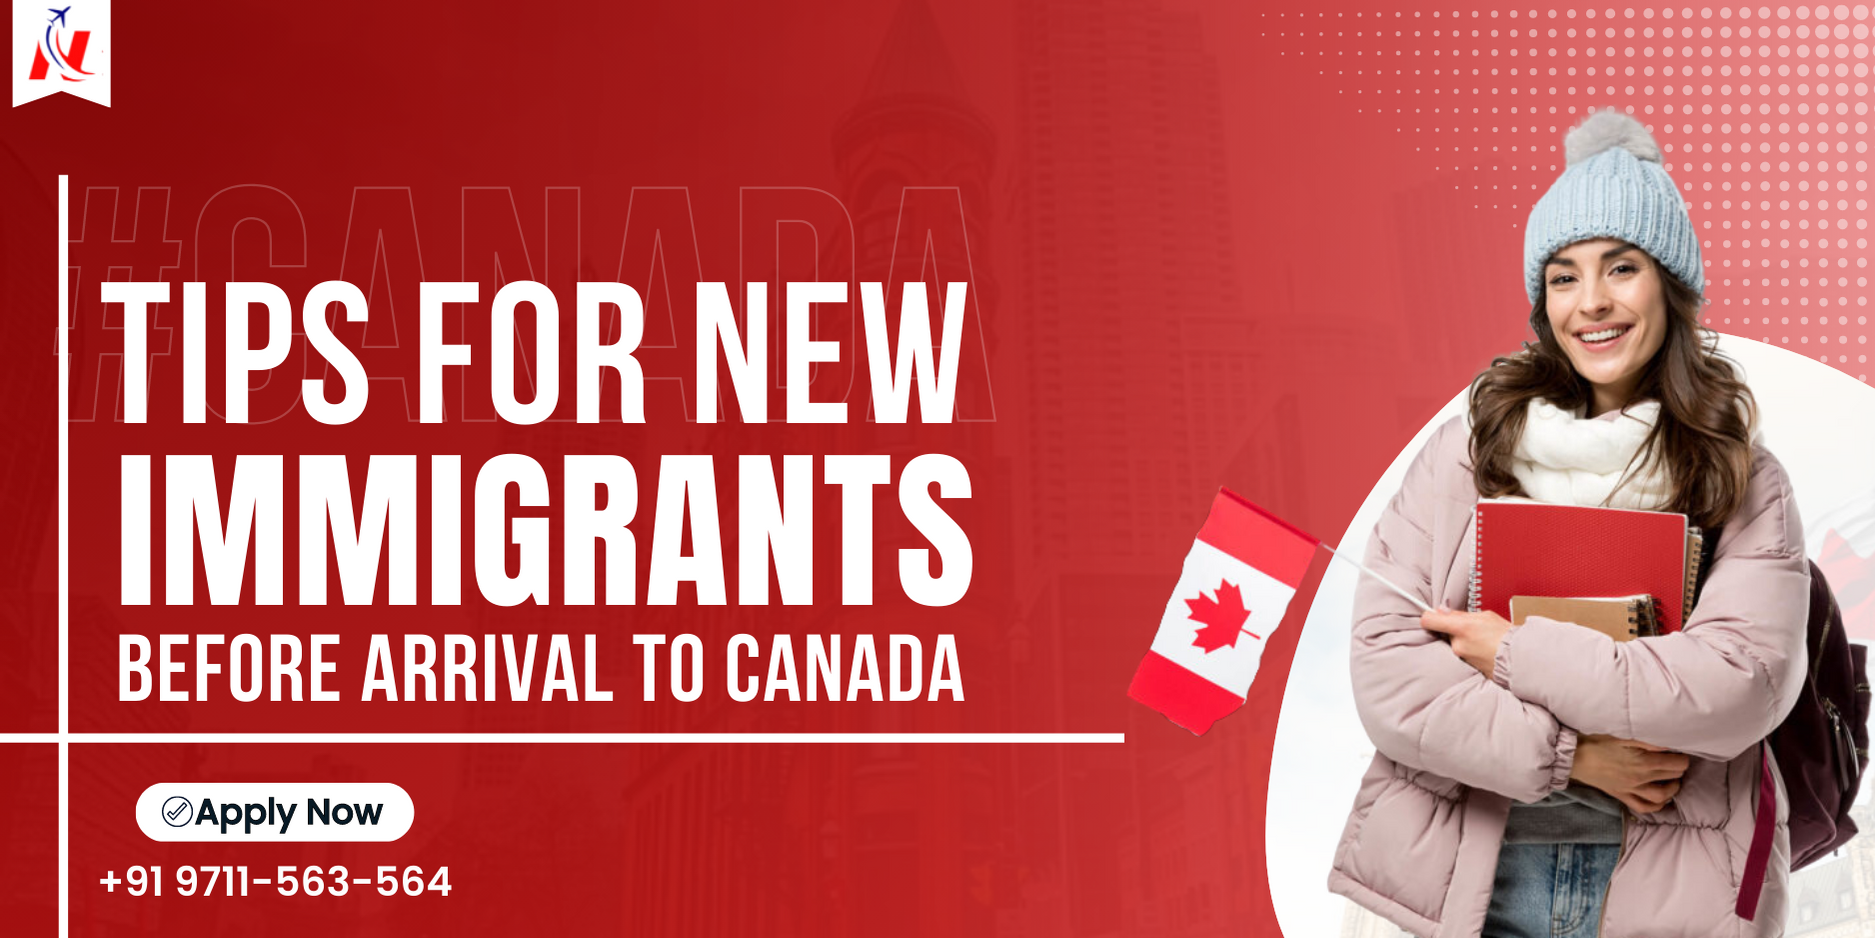 Tips for new immigrants before arrival to Canada